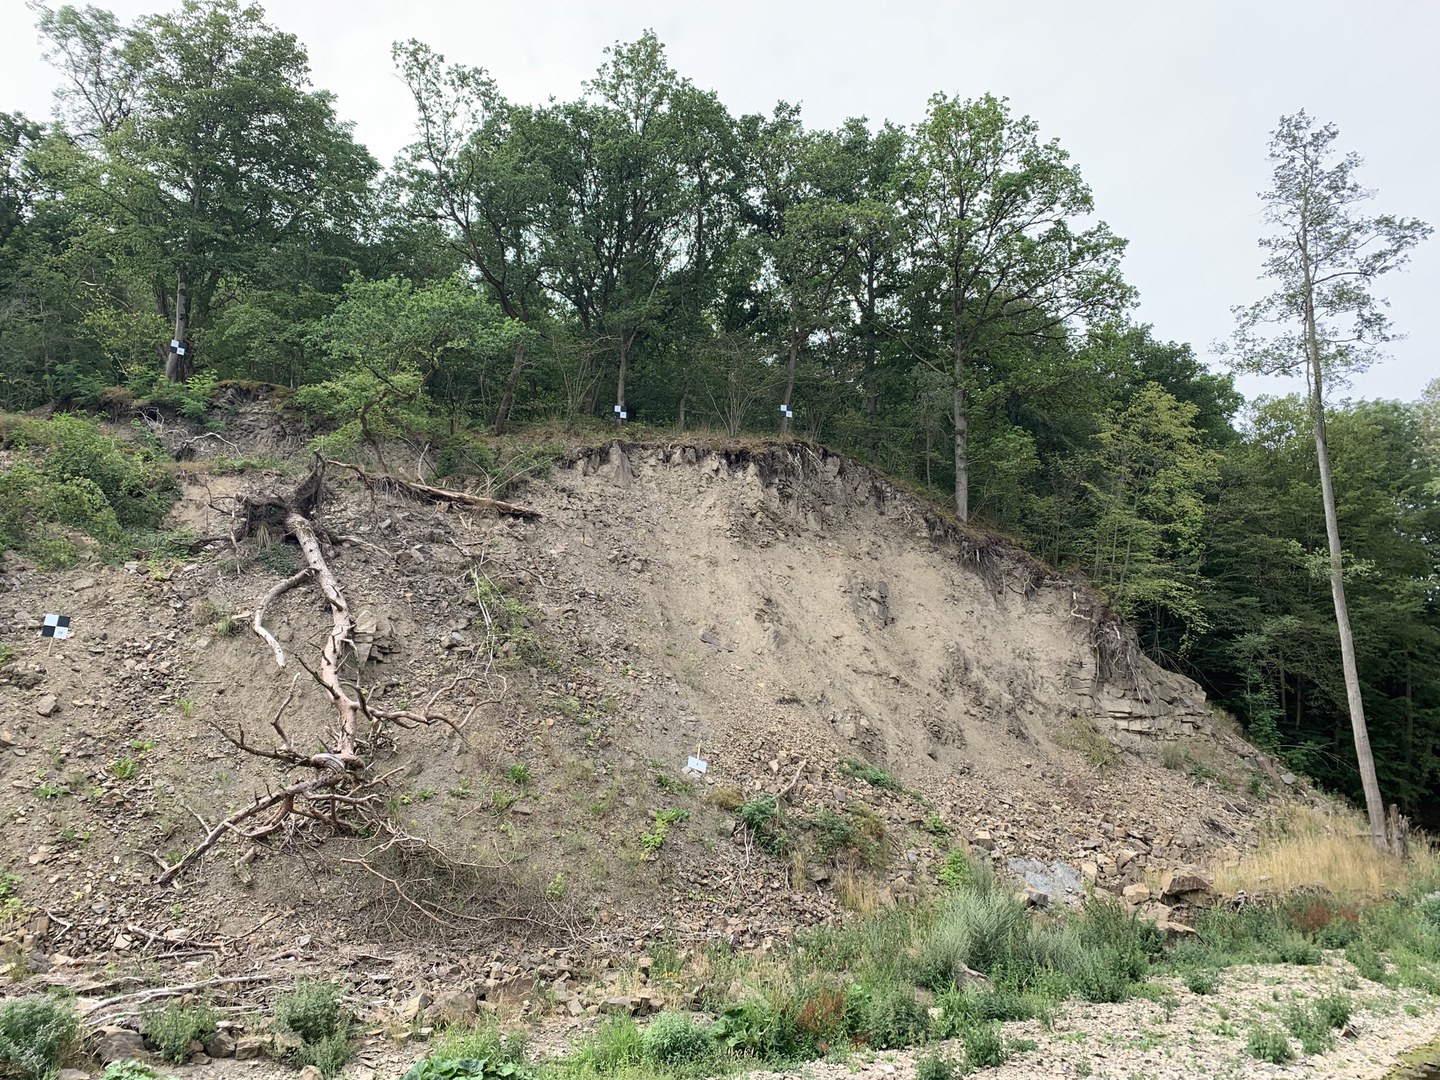 A view of a landslide in the Ahr valley